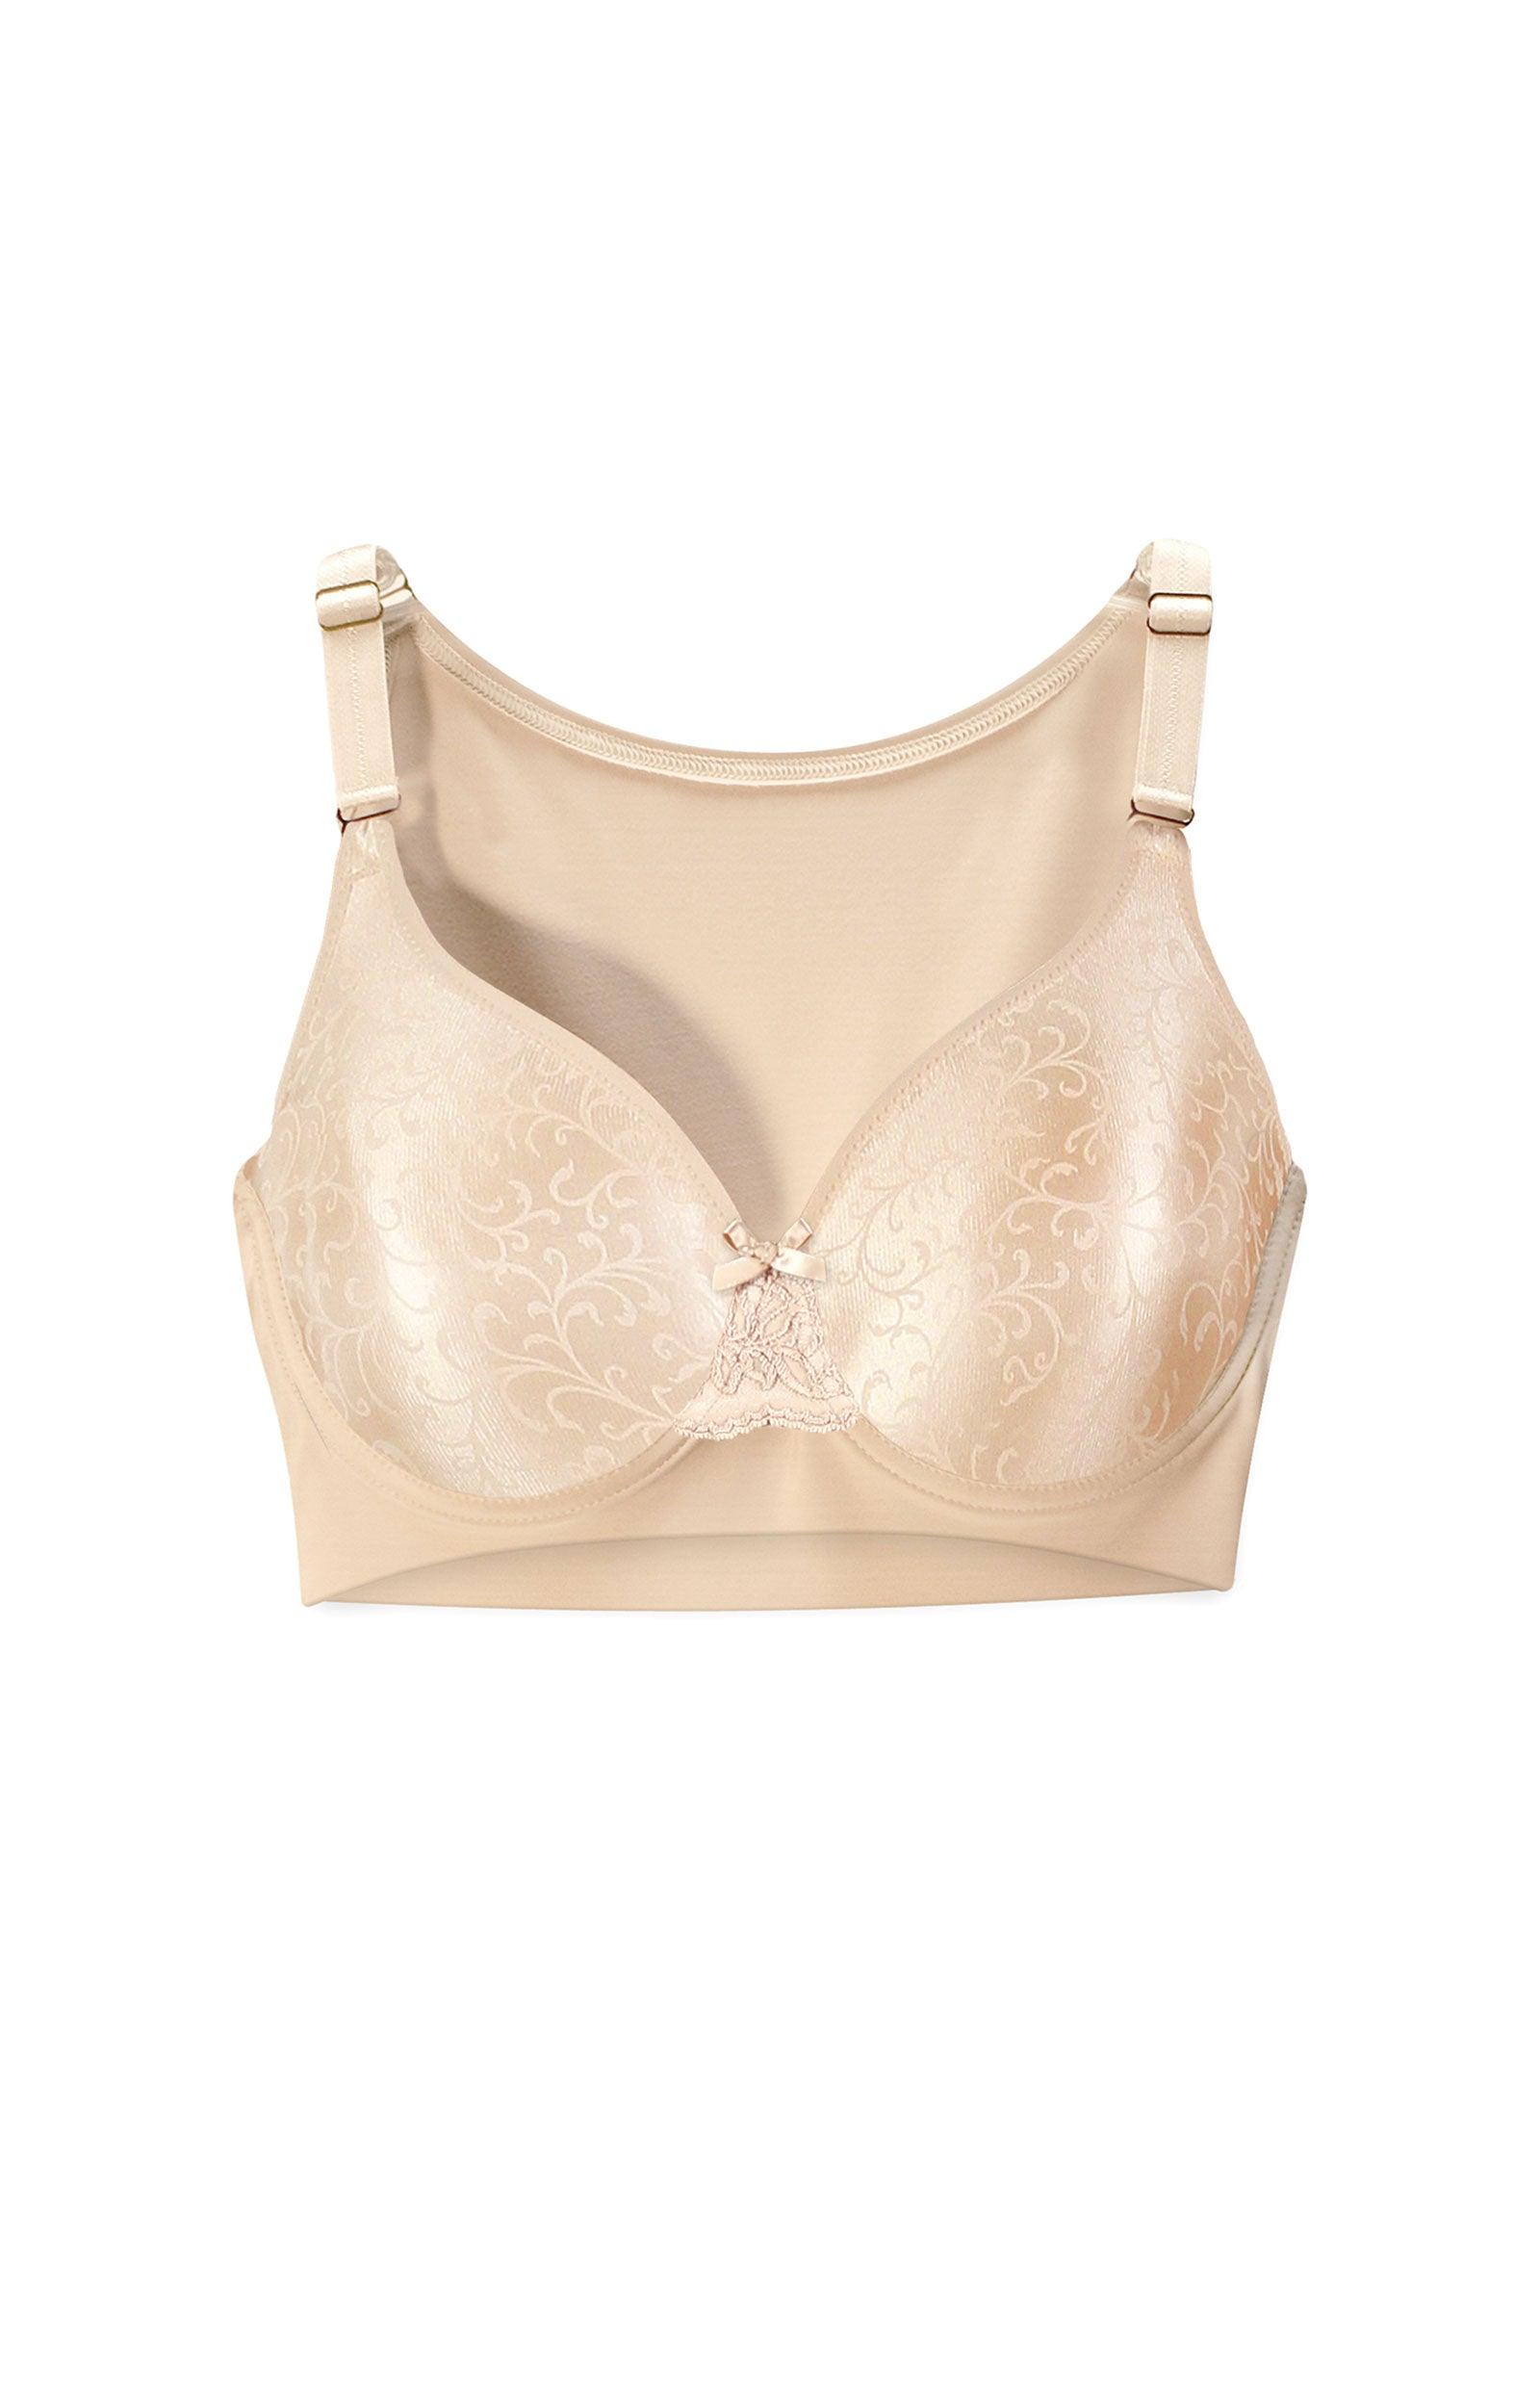 The Tankee Short Full Coverage T-Shirt Bra with Underwire, Shapeez